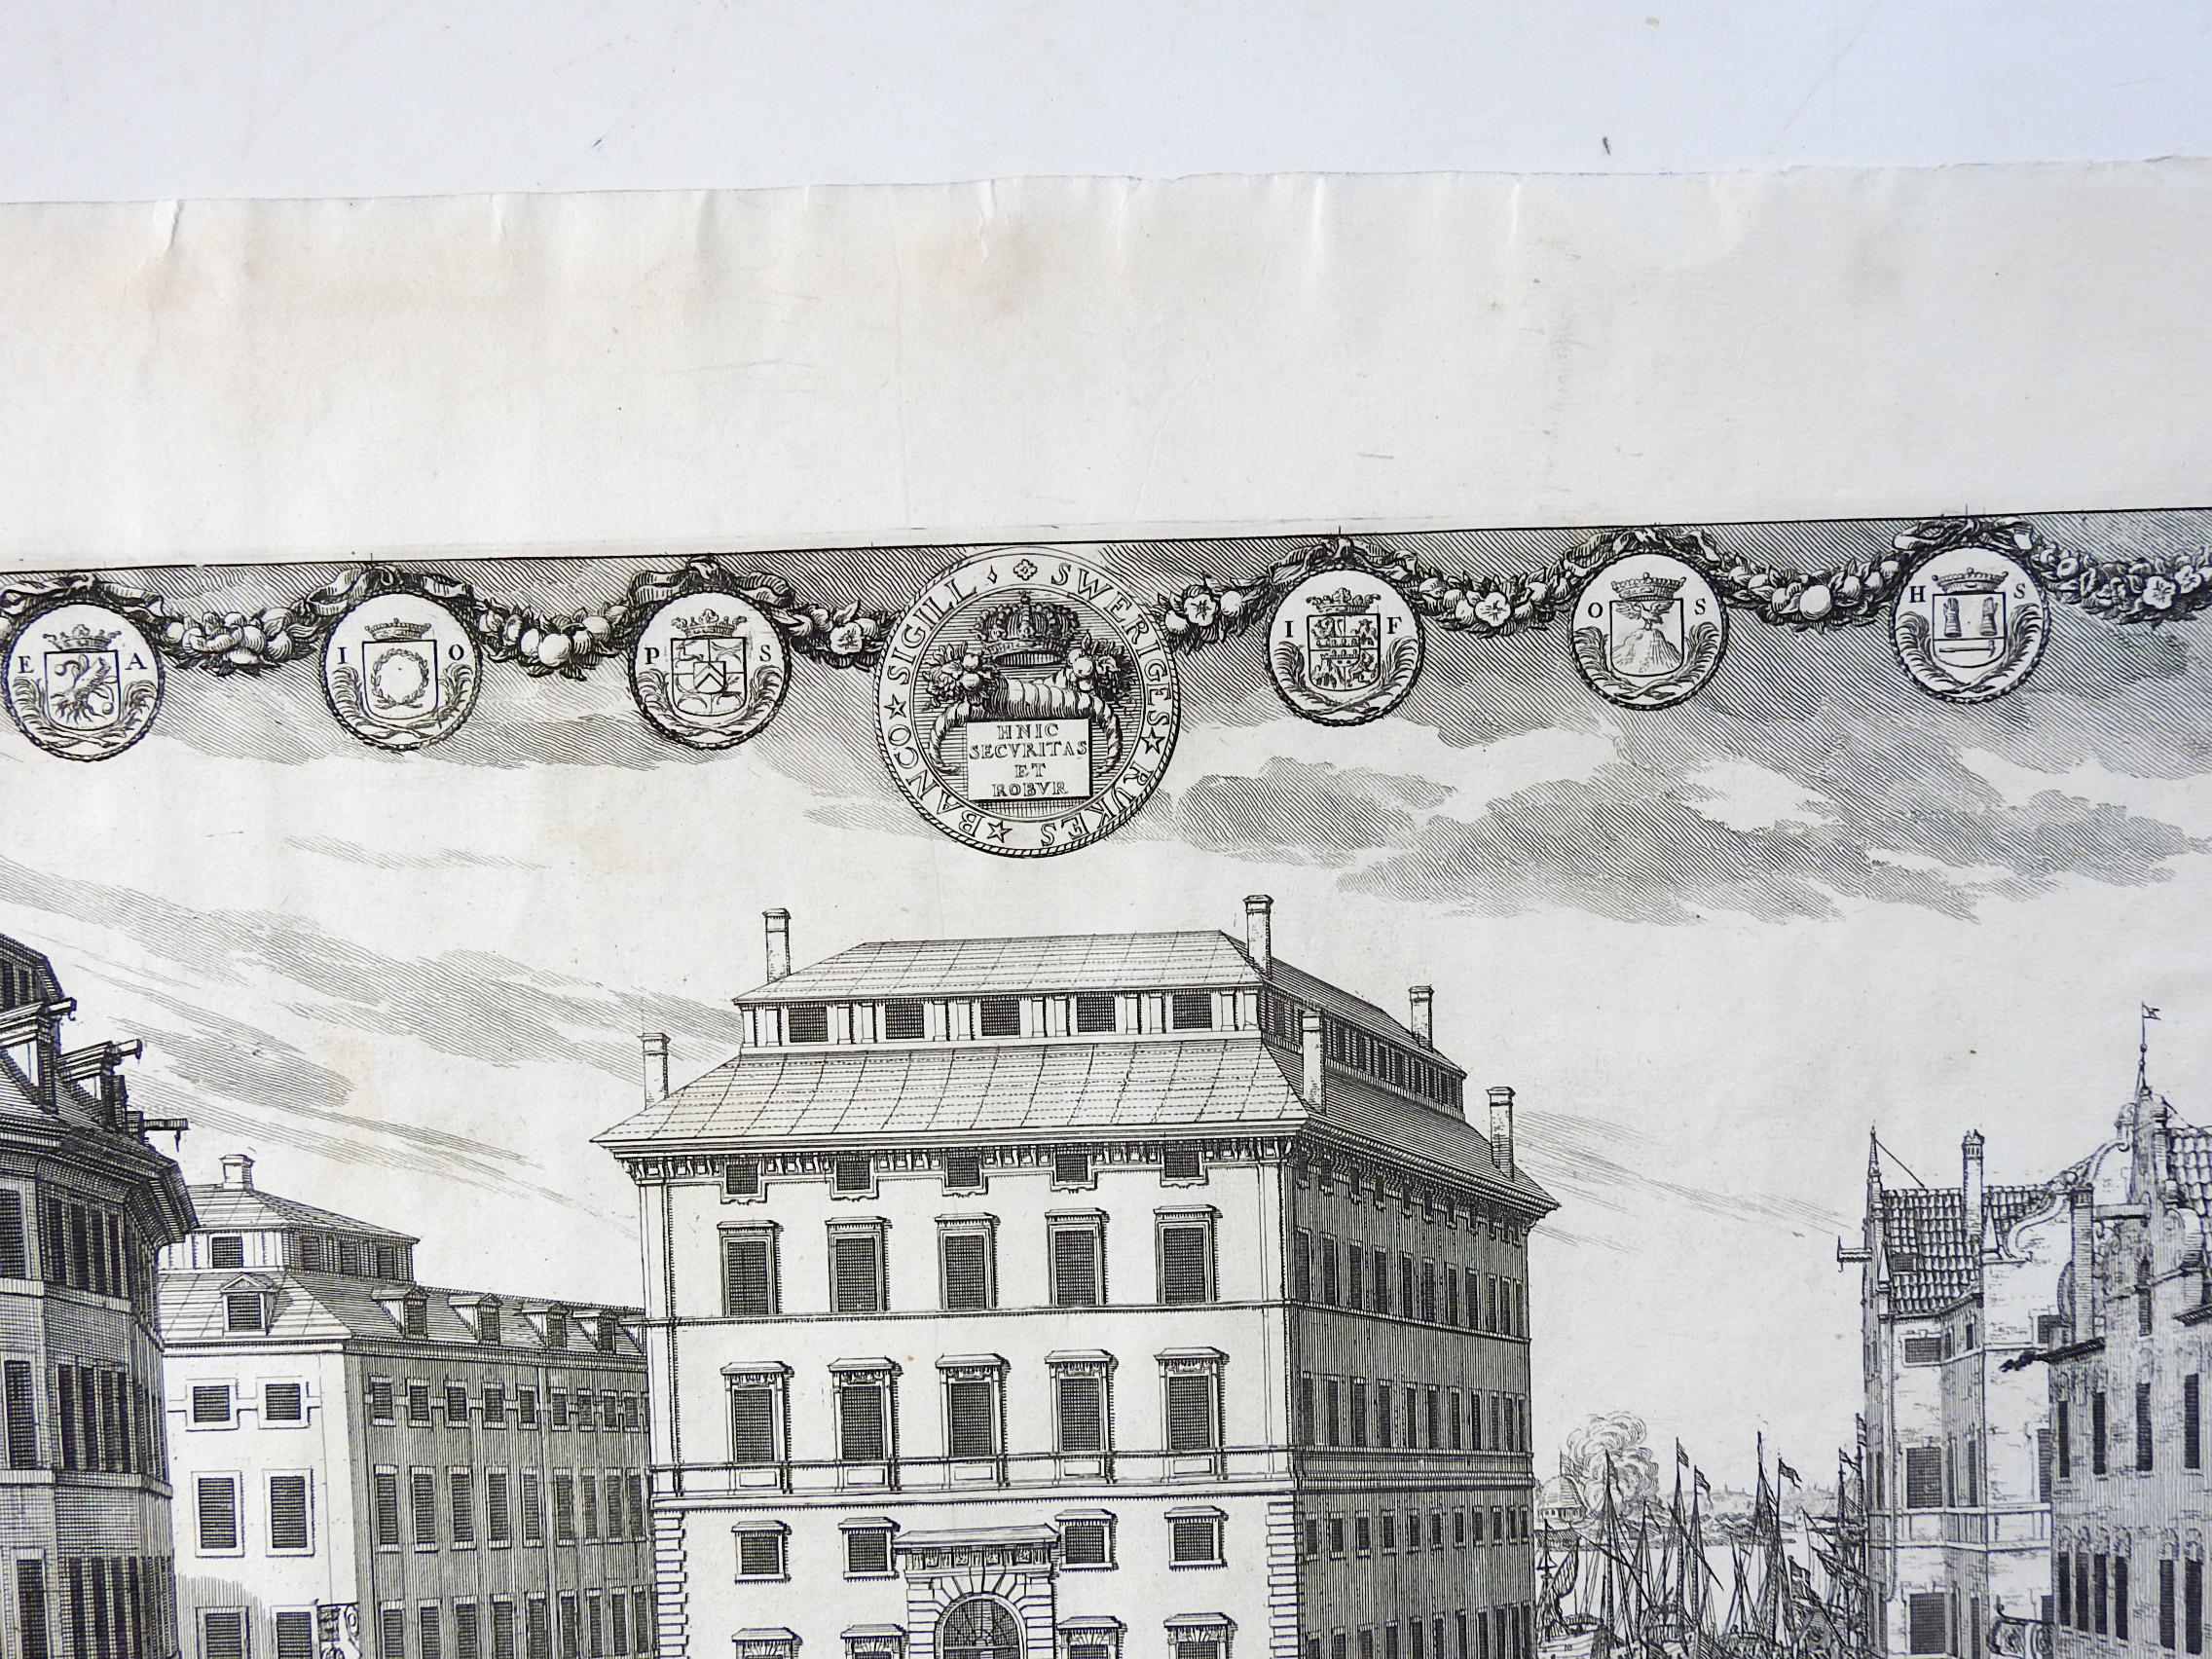 1691 Etching on paper of Stockholm Södra Bankohuset (State Bank), by Willem Swidde. From a large series of etchings collected by Erik Dahlberg. Unframed, minor age toning, few spots in margins. We have several of these Swedish etchings of various